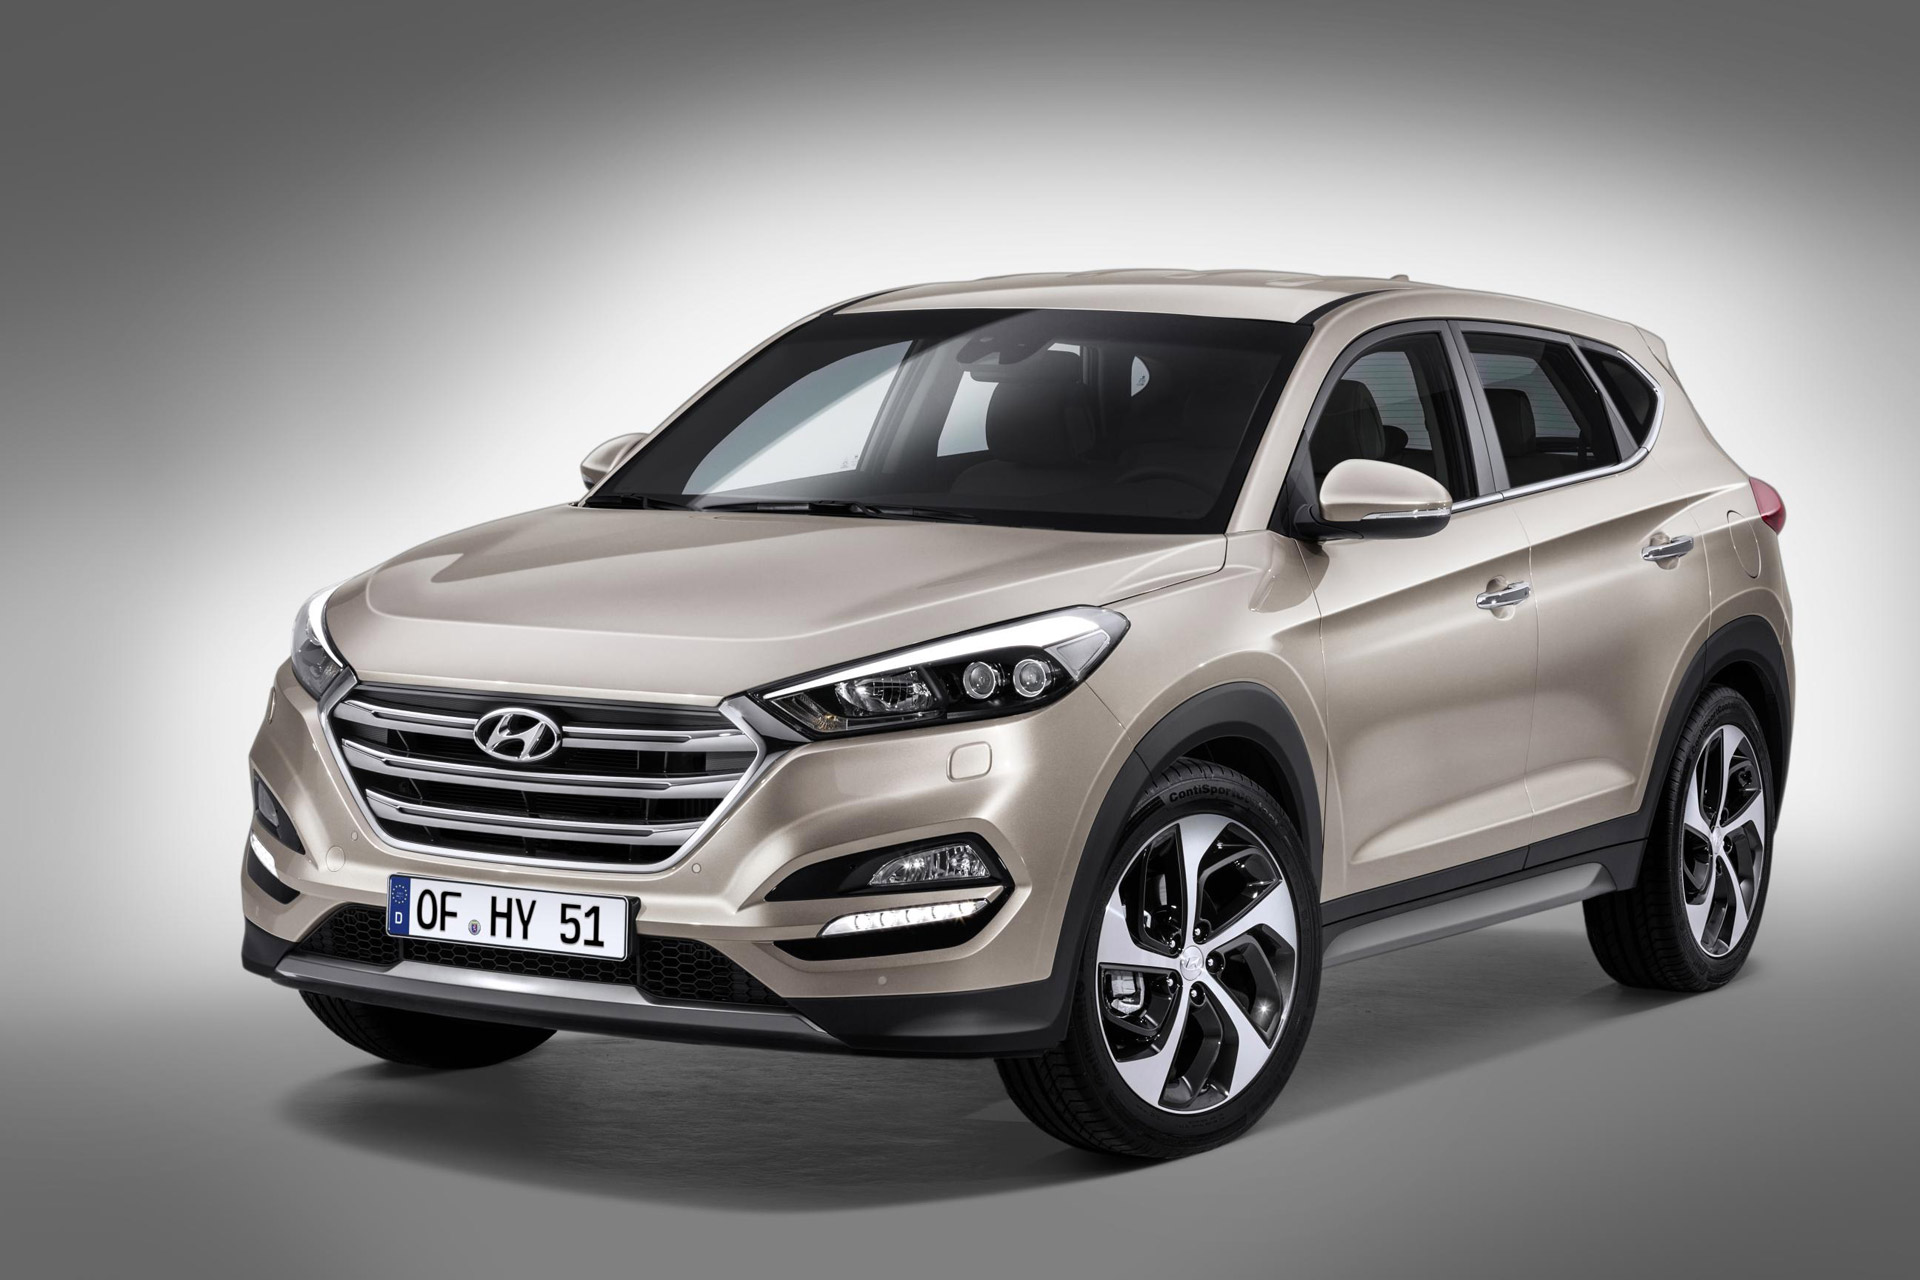 2016 Hyundai Tucson Shows Two Different Hybrid Concepts In Geneva